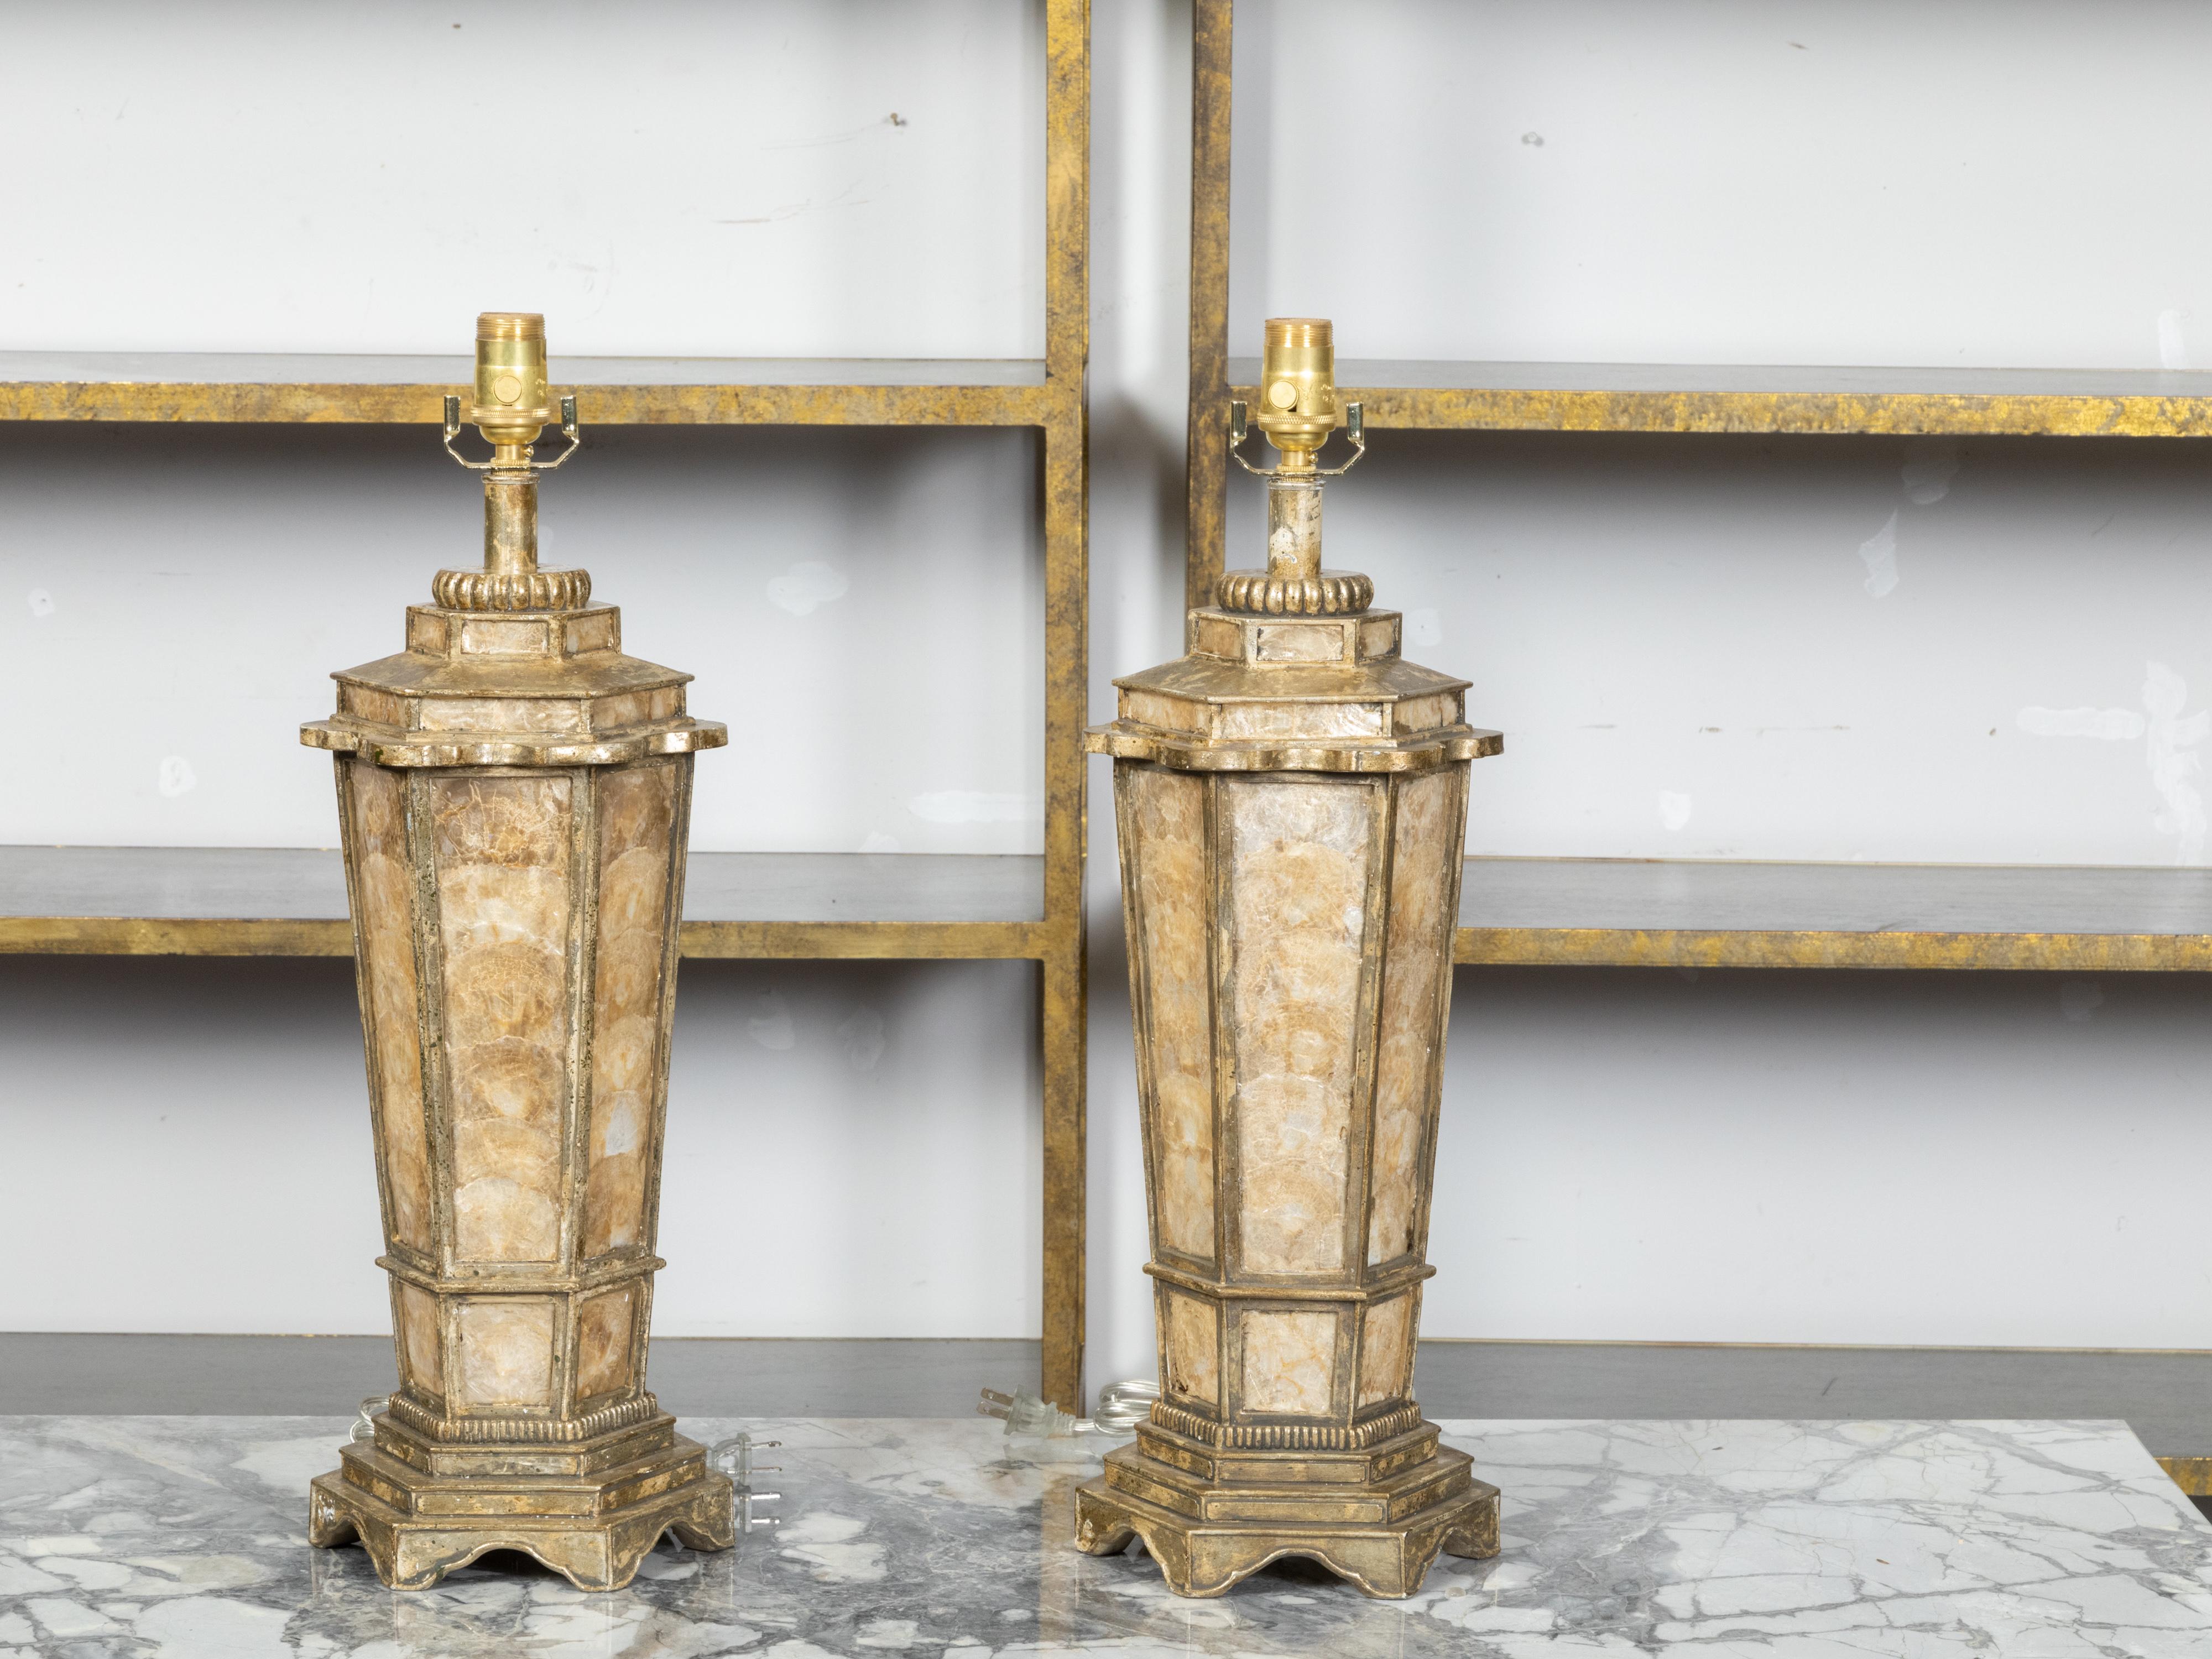 A pair of vintage American table lamps from the late 20th century, with hexagonal bodies, shell décor and gilded accents. Made in the USA during the last quarter of the 20th century, each of this pair of table lamps features an hexagonal tapering